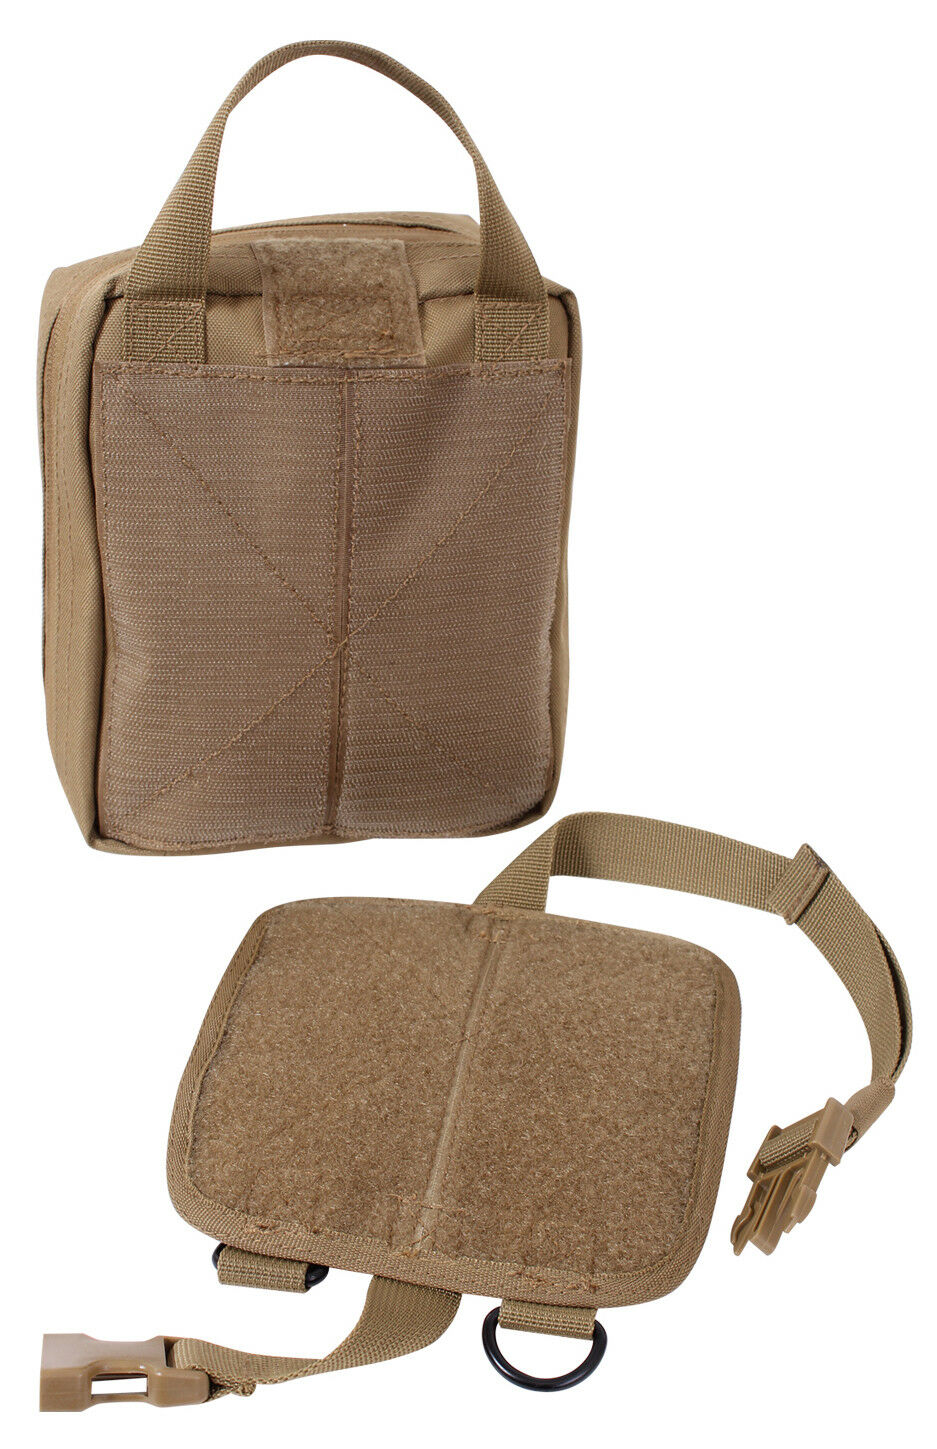 Rothco Tactical MOLLE Breakaway Pouch - Coyote Brown